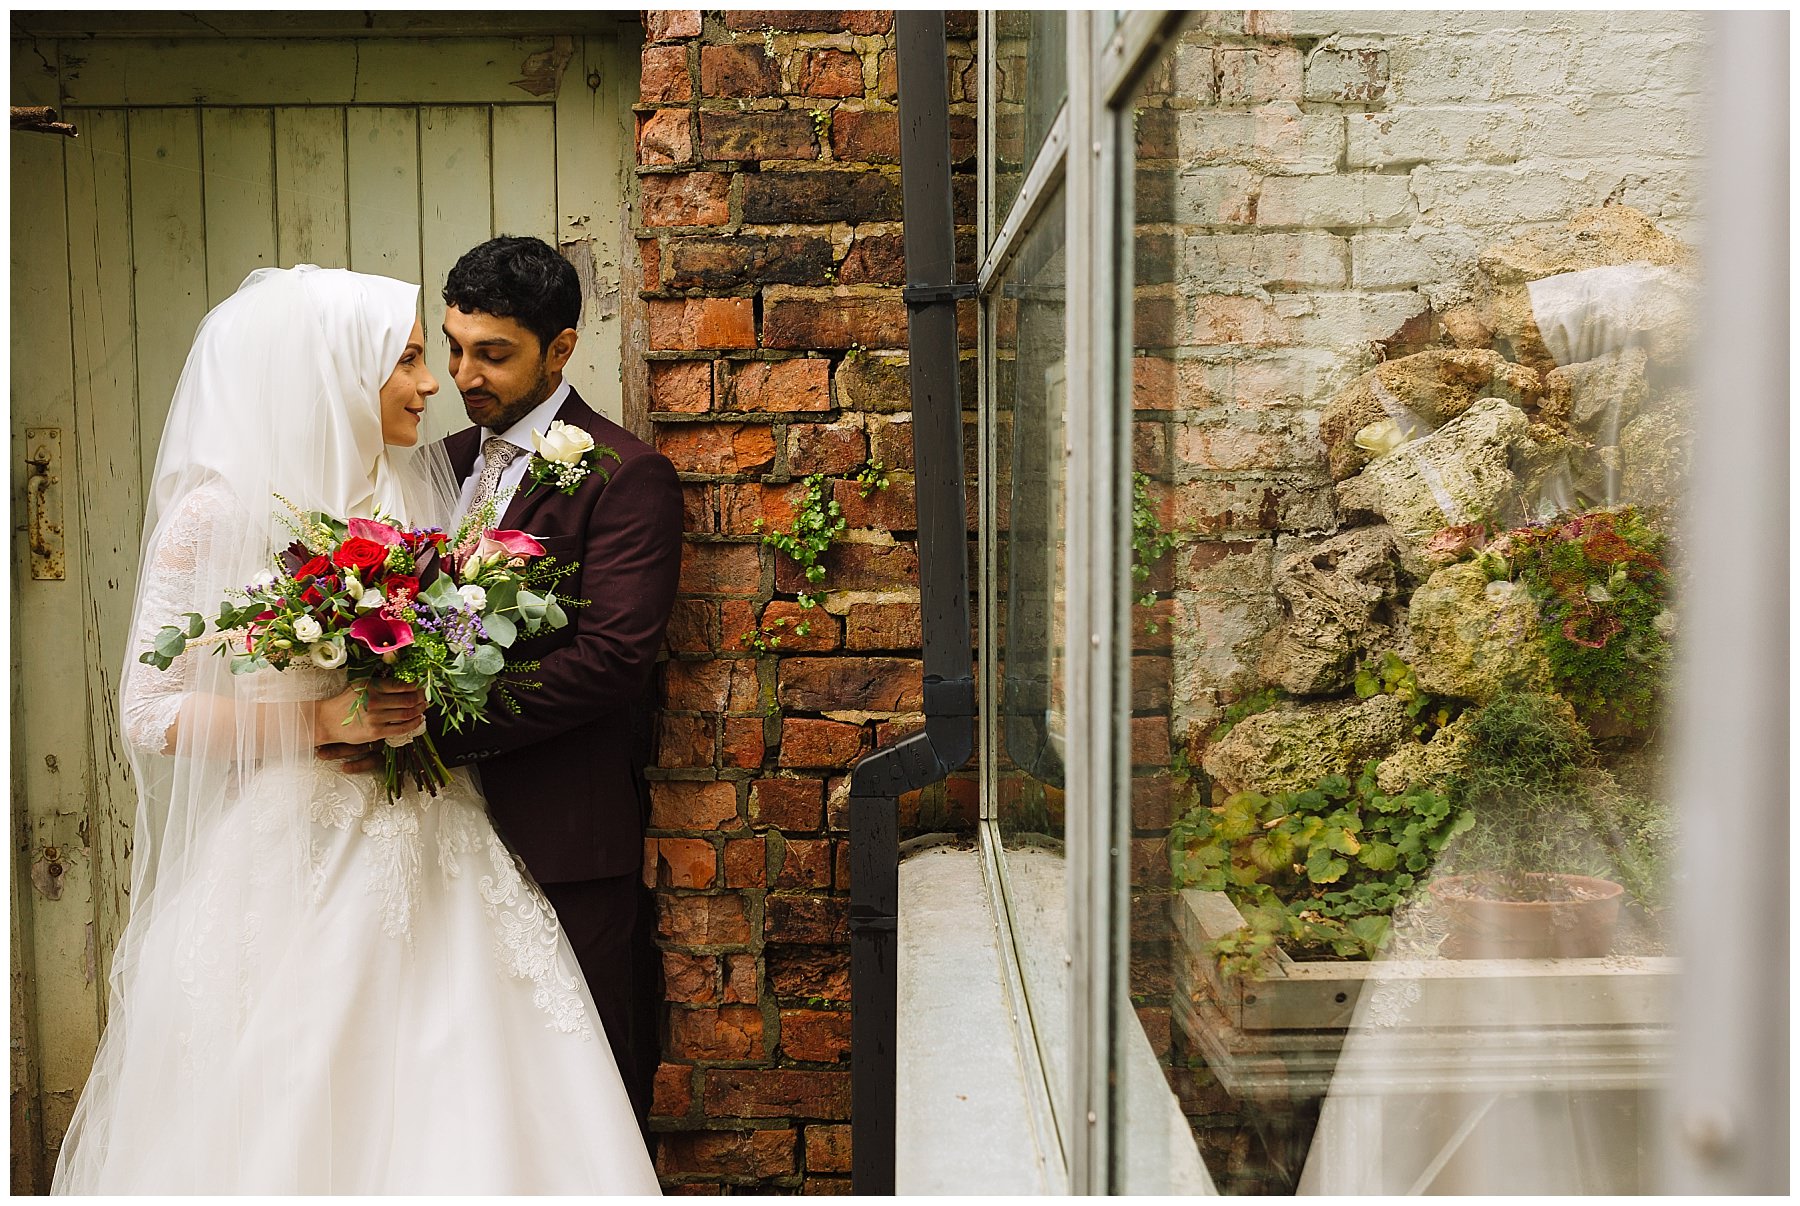 Bridal portraits at The Old Parsonage in Didsbury